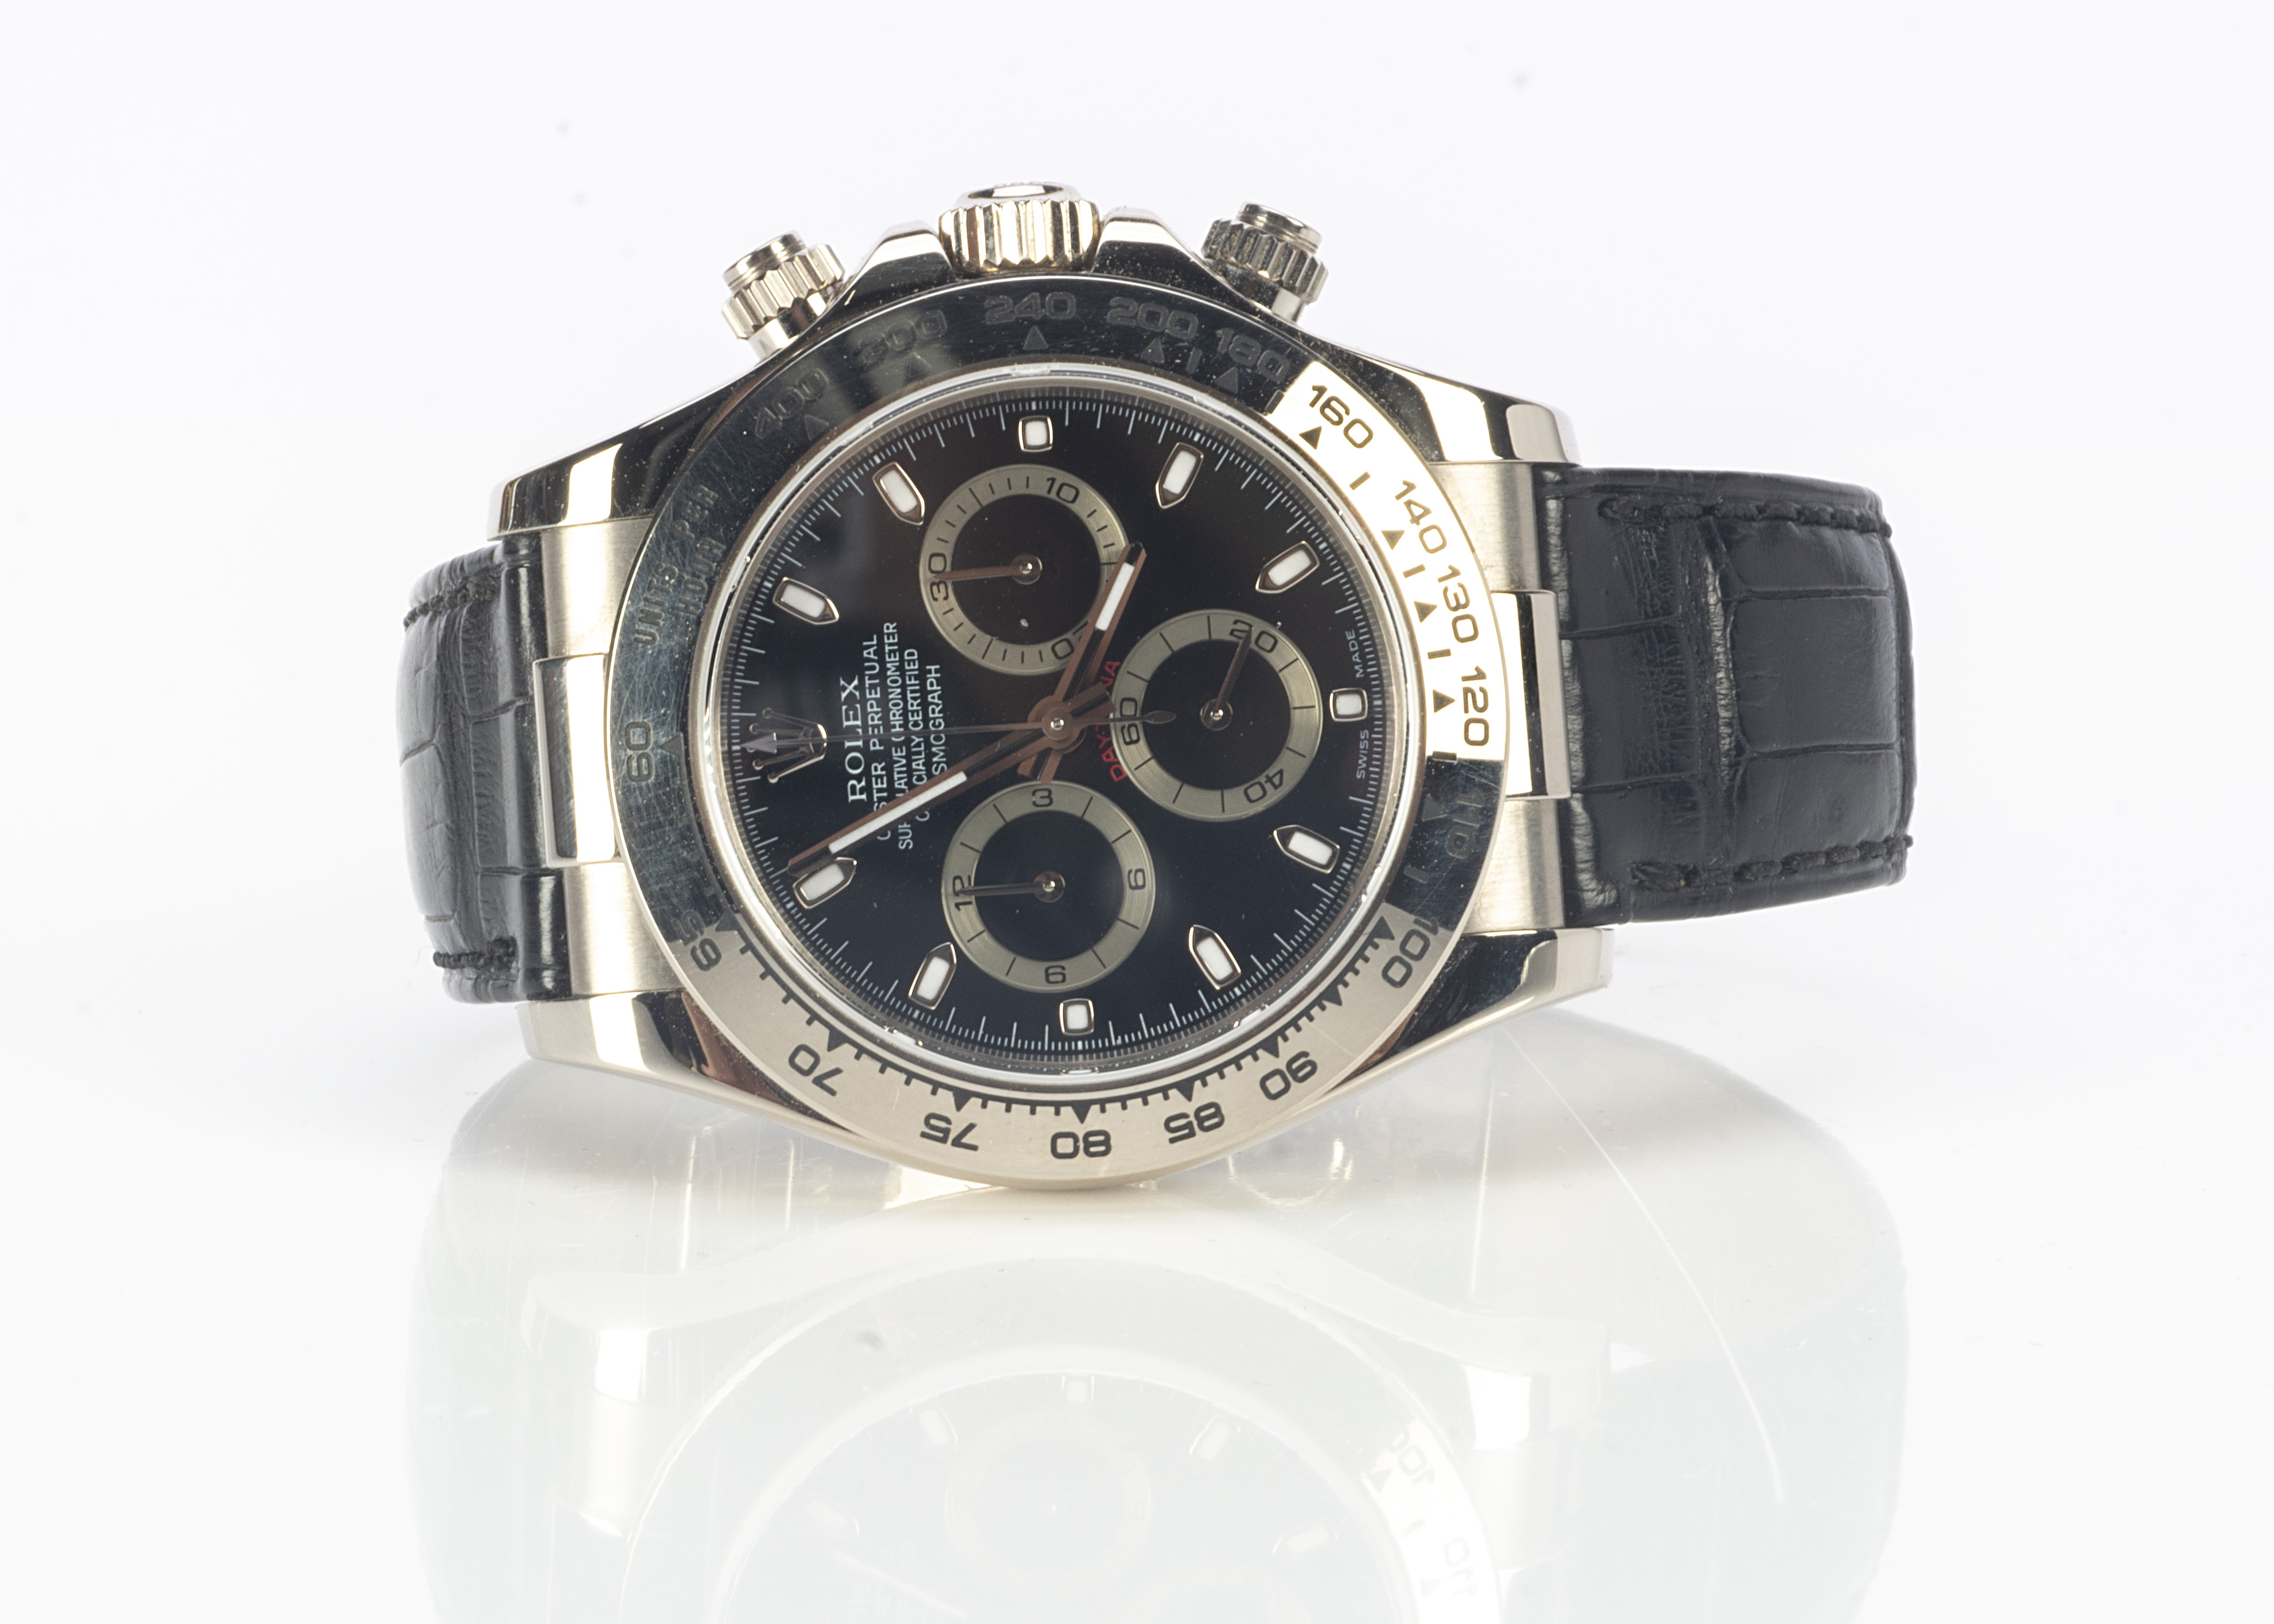 Watch and Clock Auction 